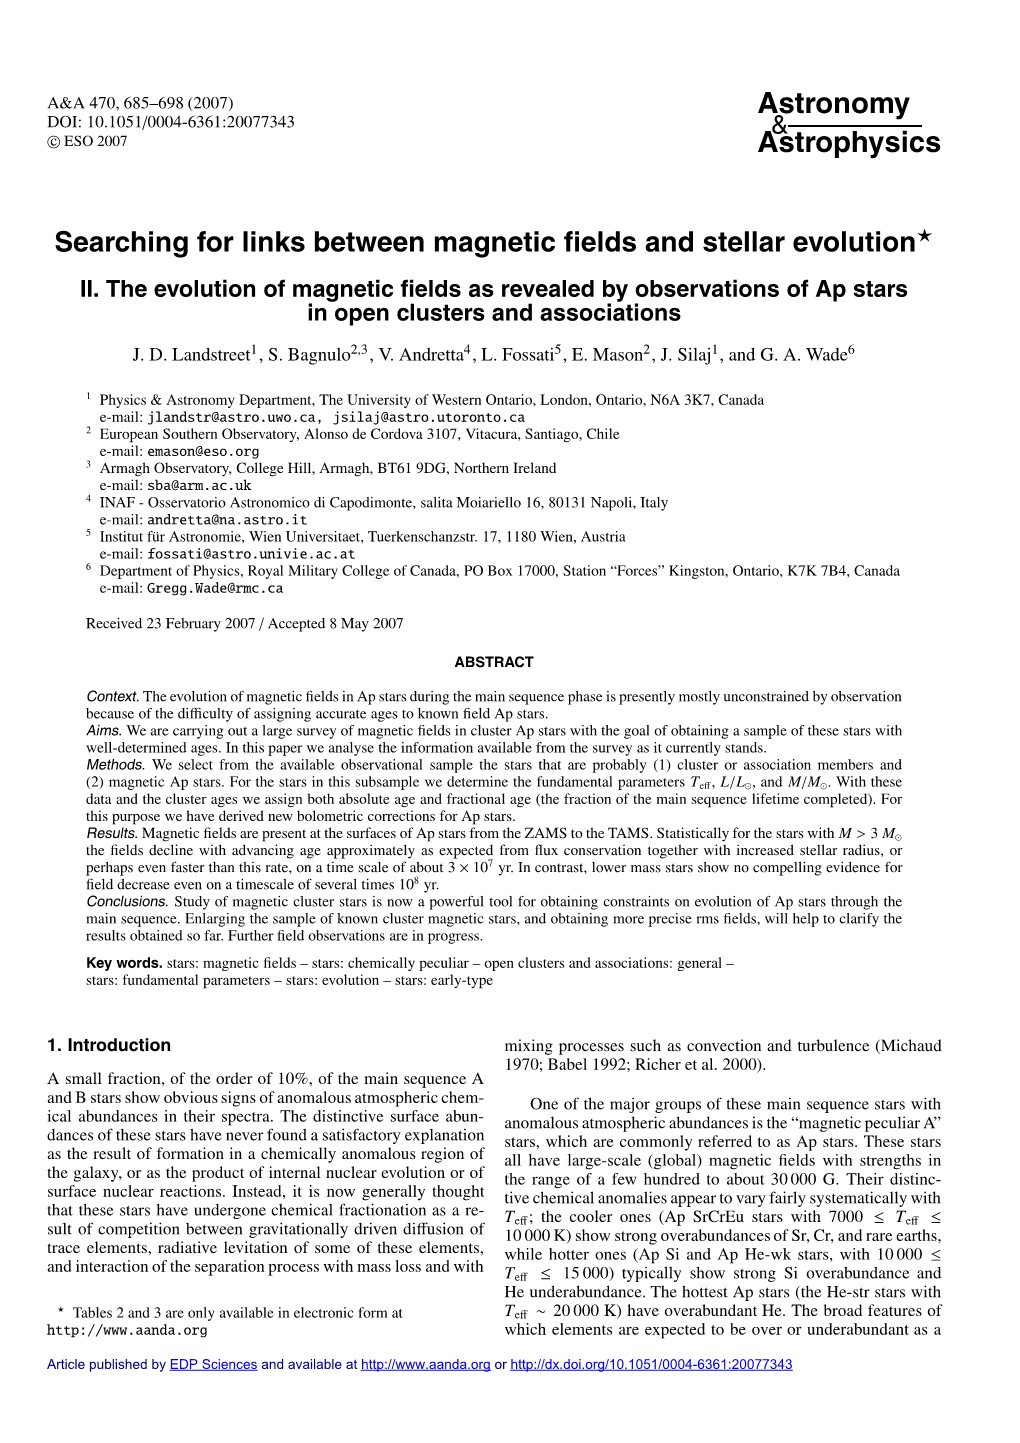 II. the Evolution of Magnetic Fields As